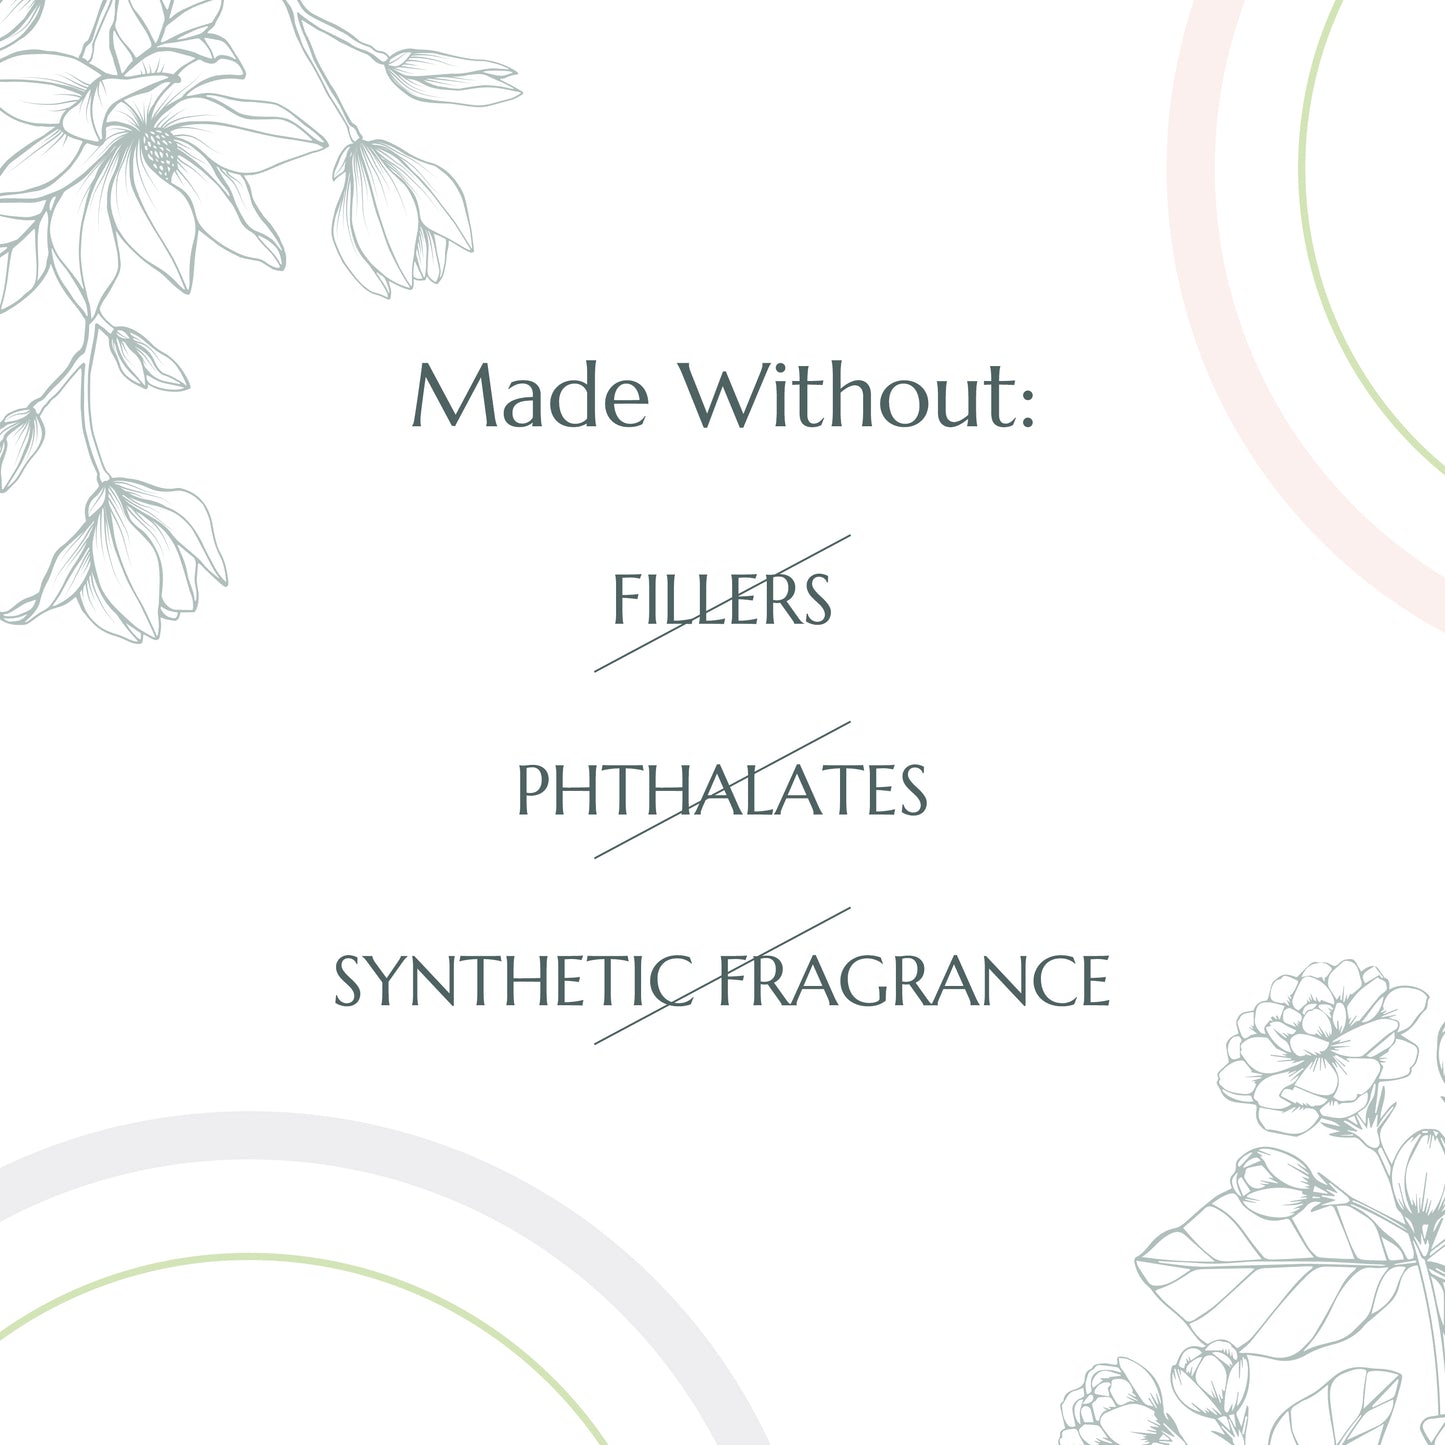 Made Without fillers, phthalates or synthetic fragrance